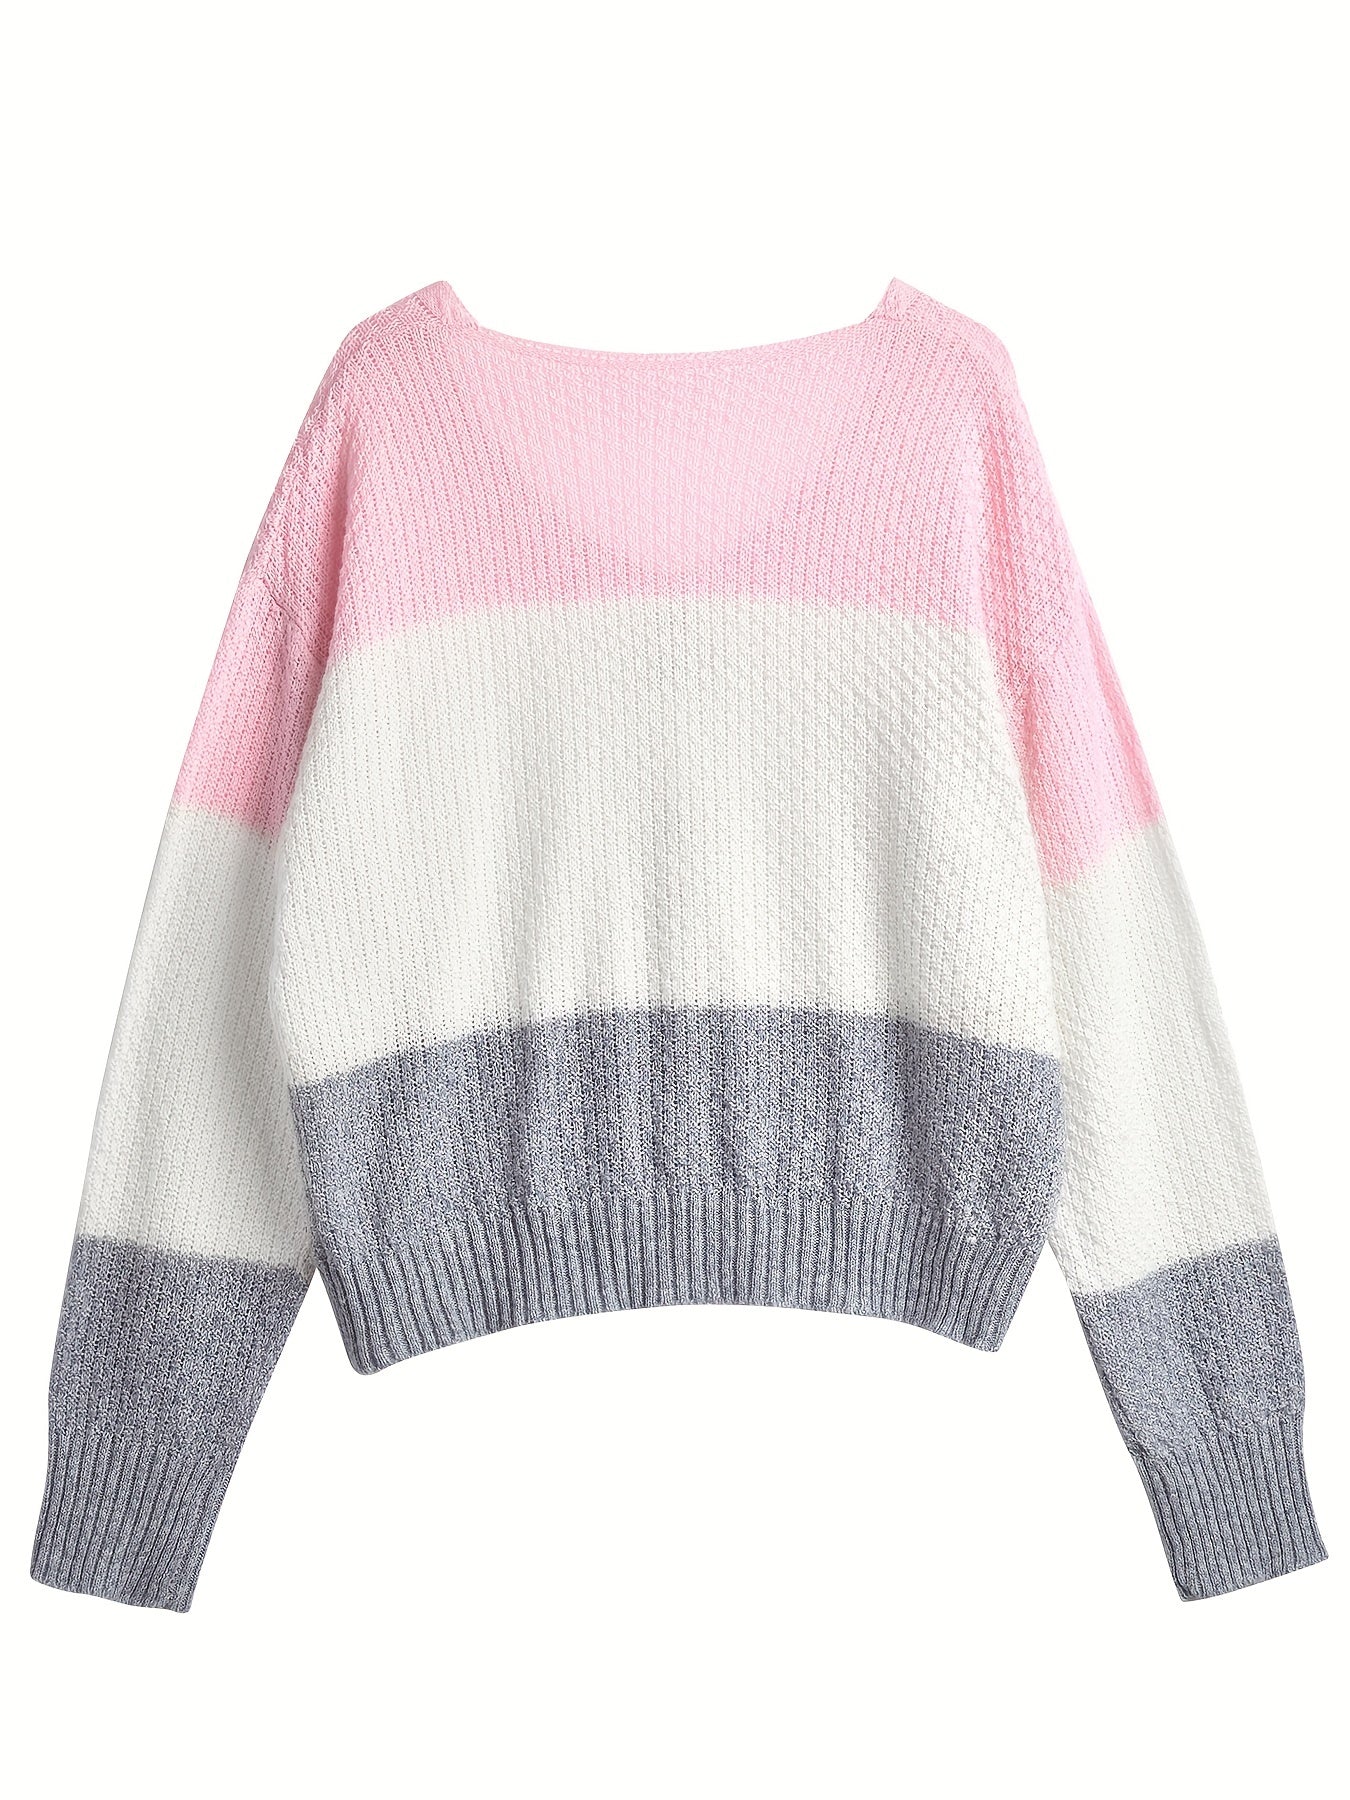 vlovelaw Color Block V Neck Pullover Sweater, Casual Long Sleeve Button Sweater, Women's Clothing